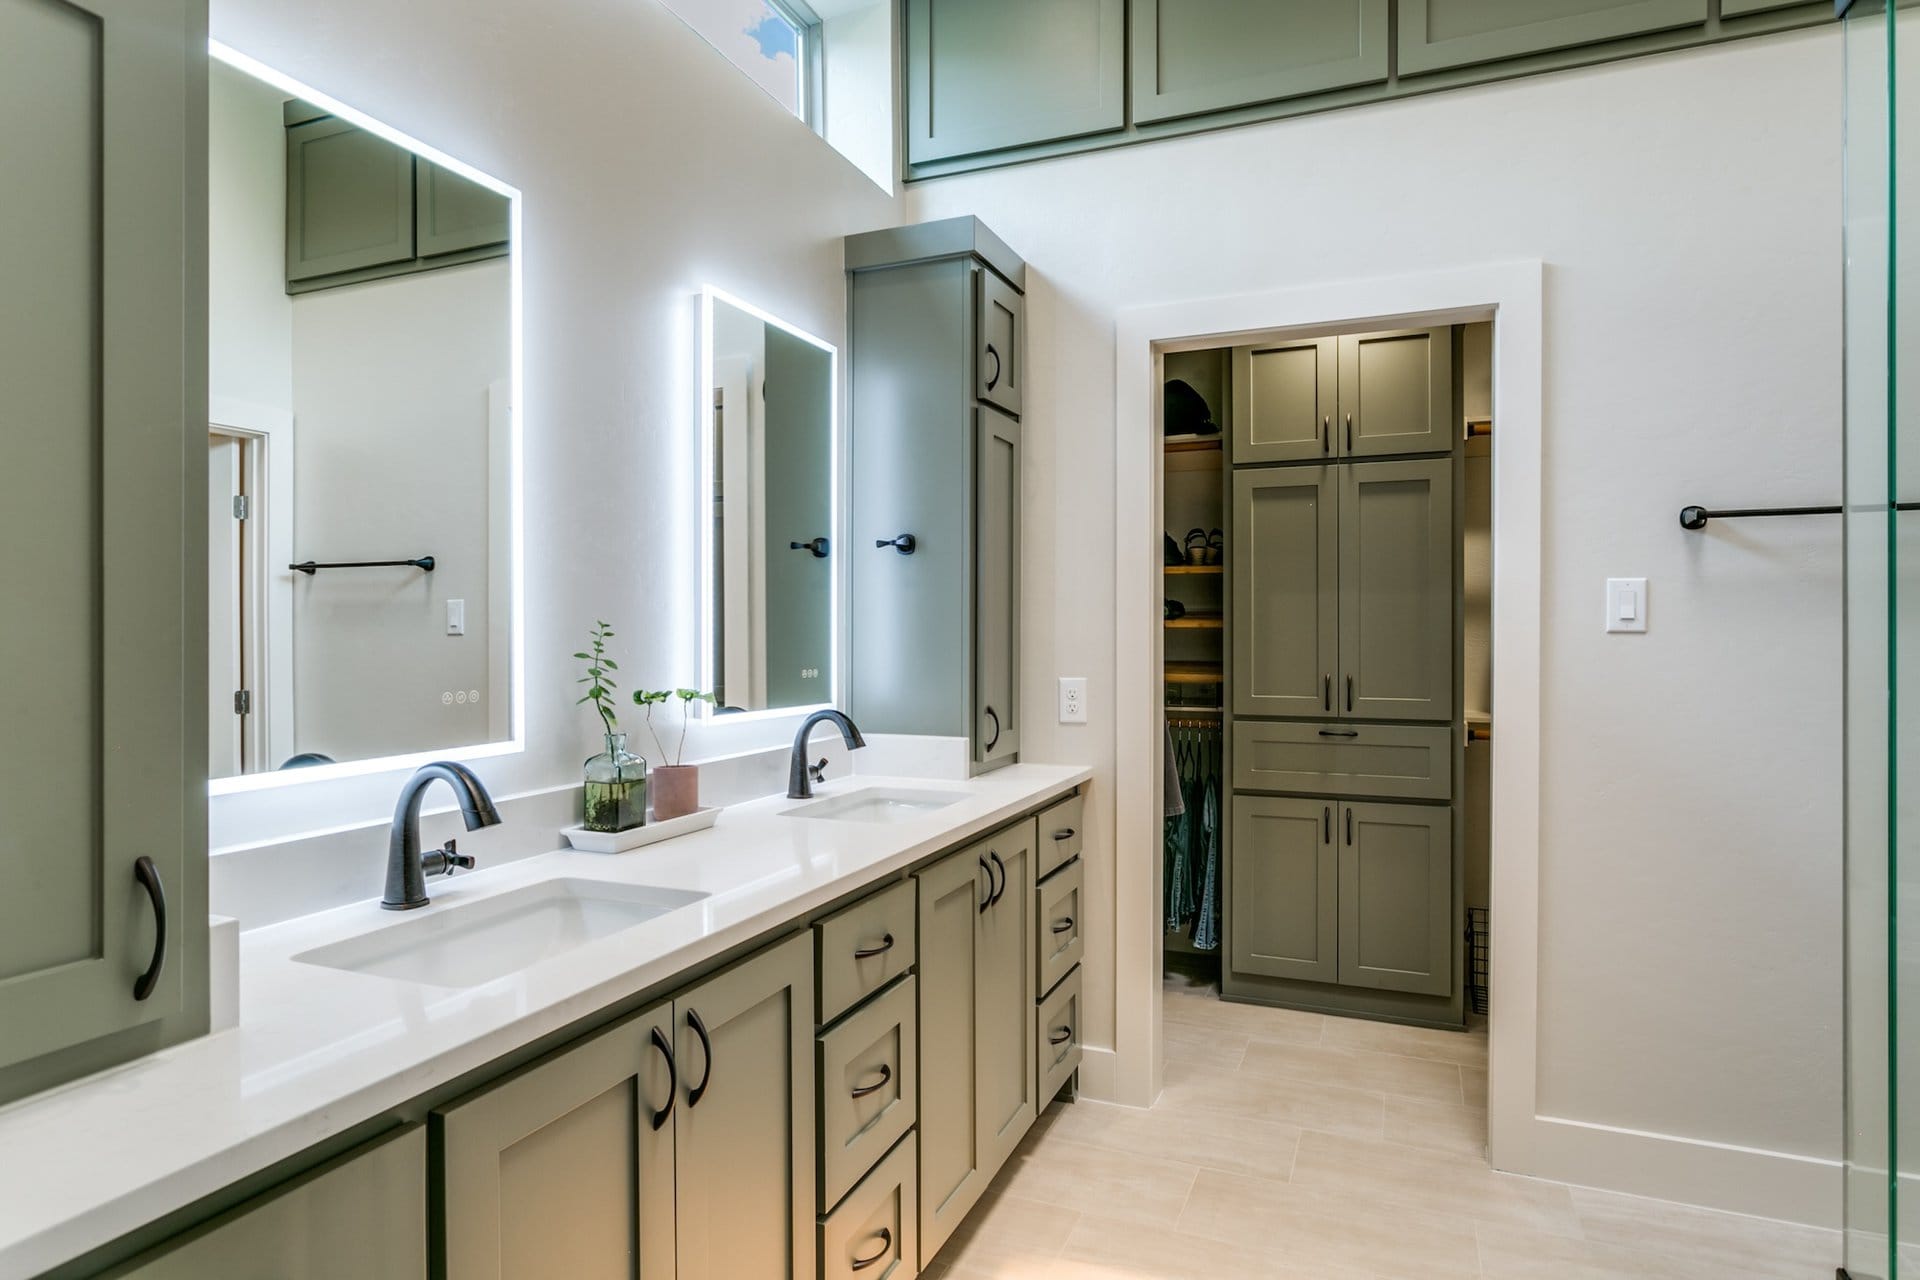 Featured image for “Bathroom Remodel in Irving, Texas”